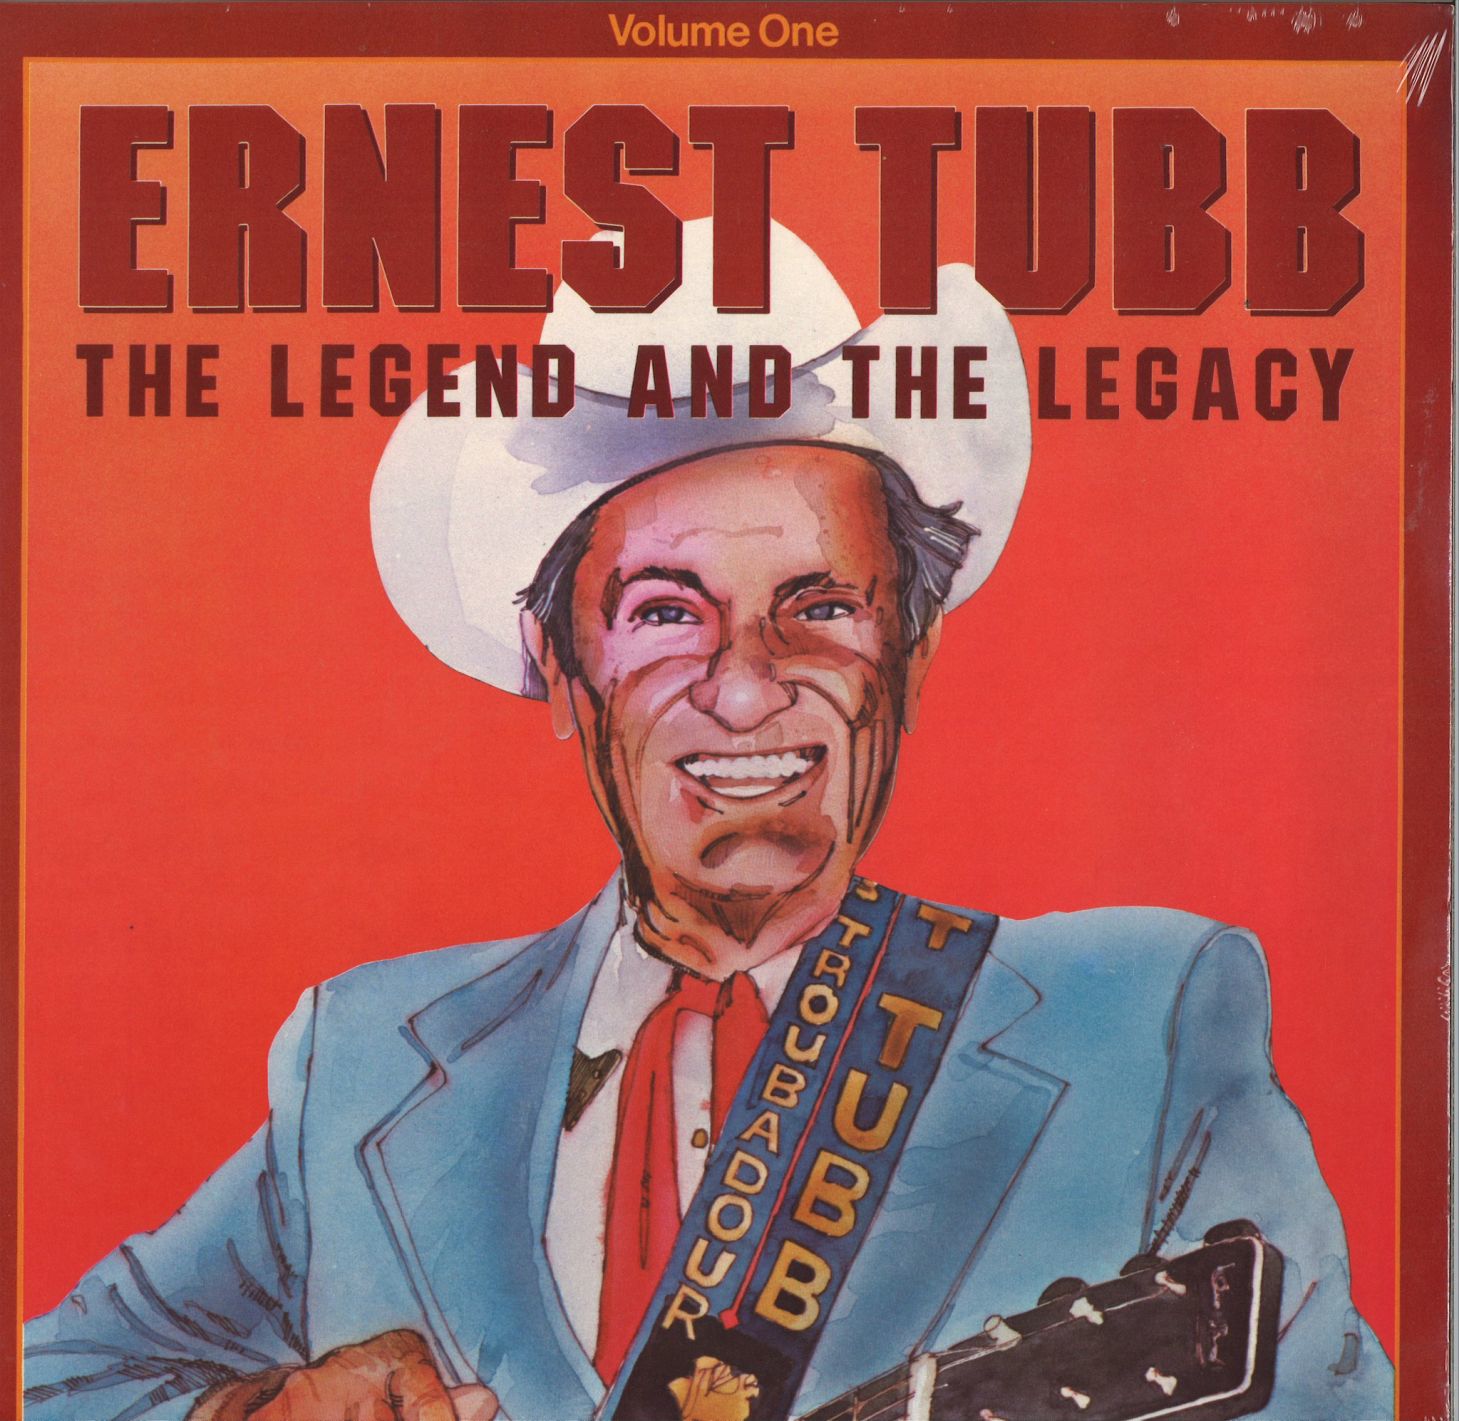 Terrible Noise: Ernest Tubb is timeless